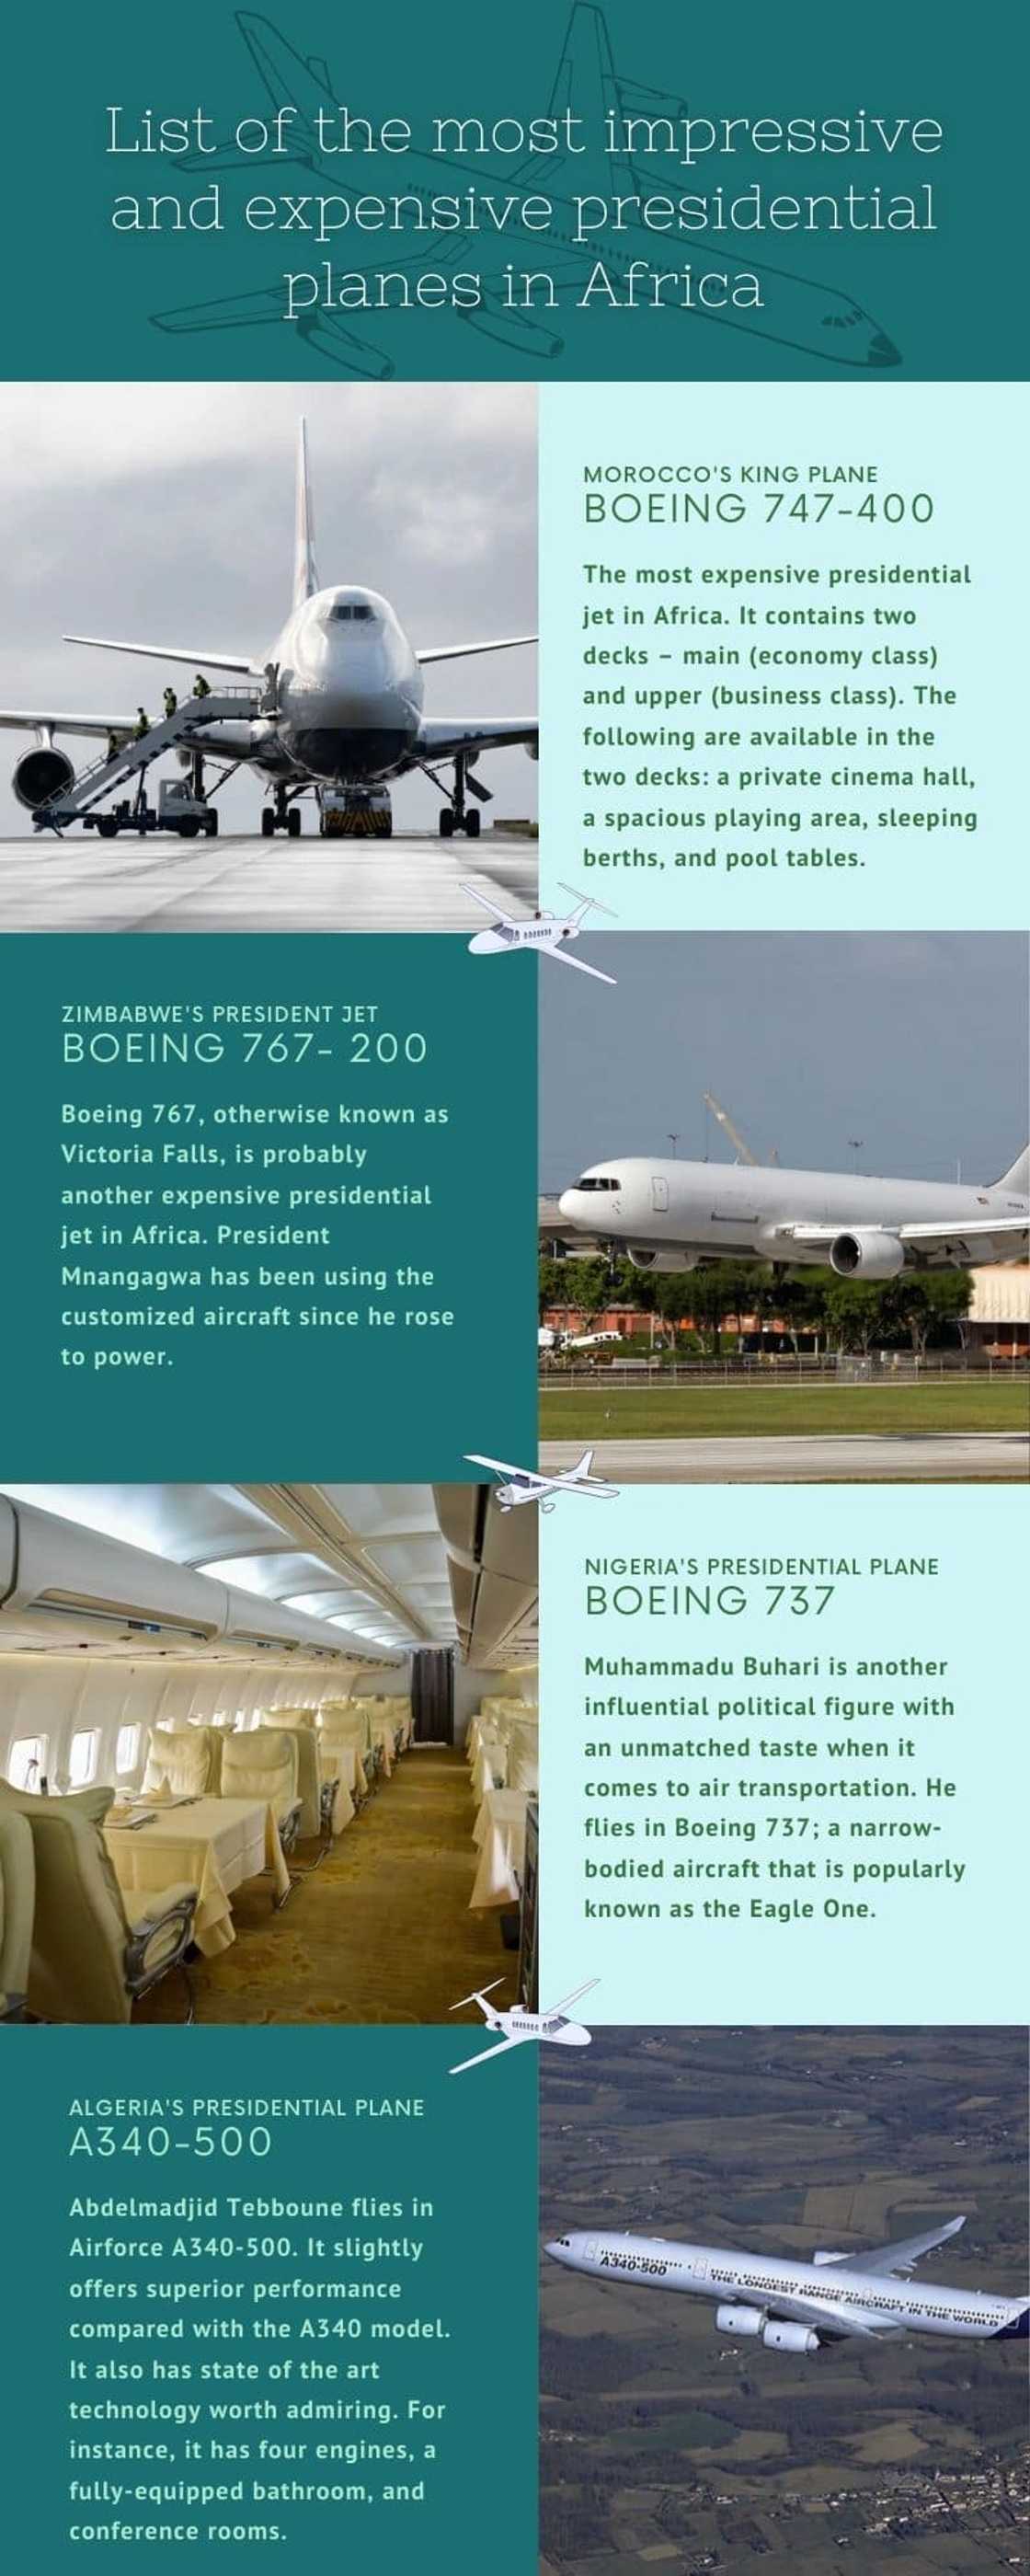 the most impressive and expensive presidential planes in Africa 2020